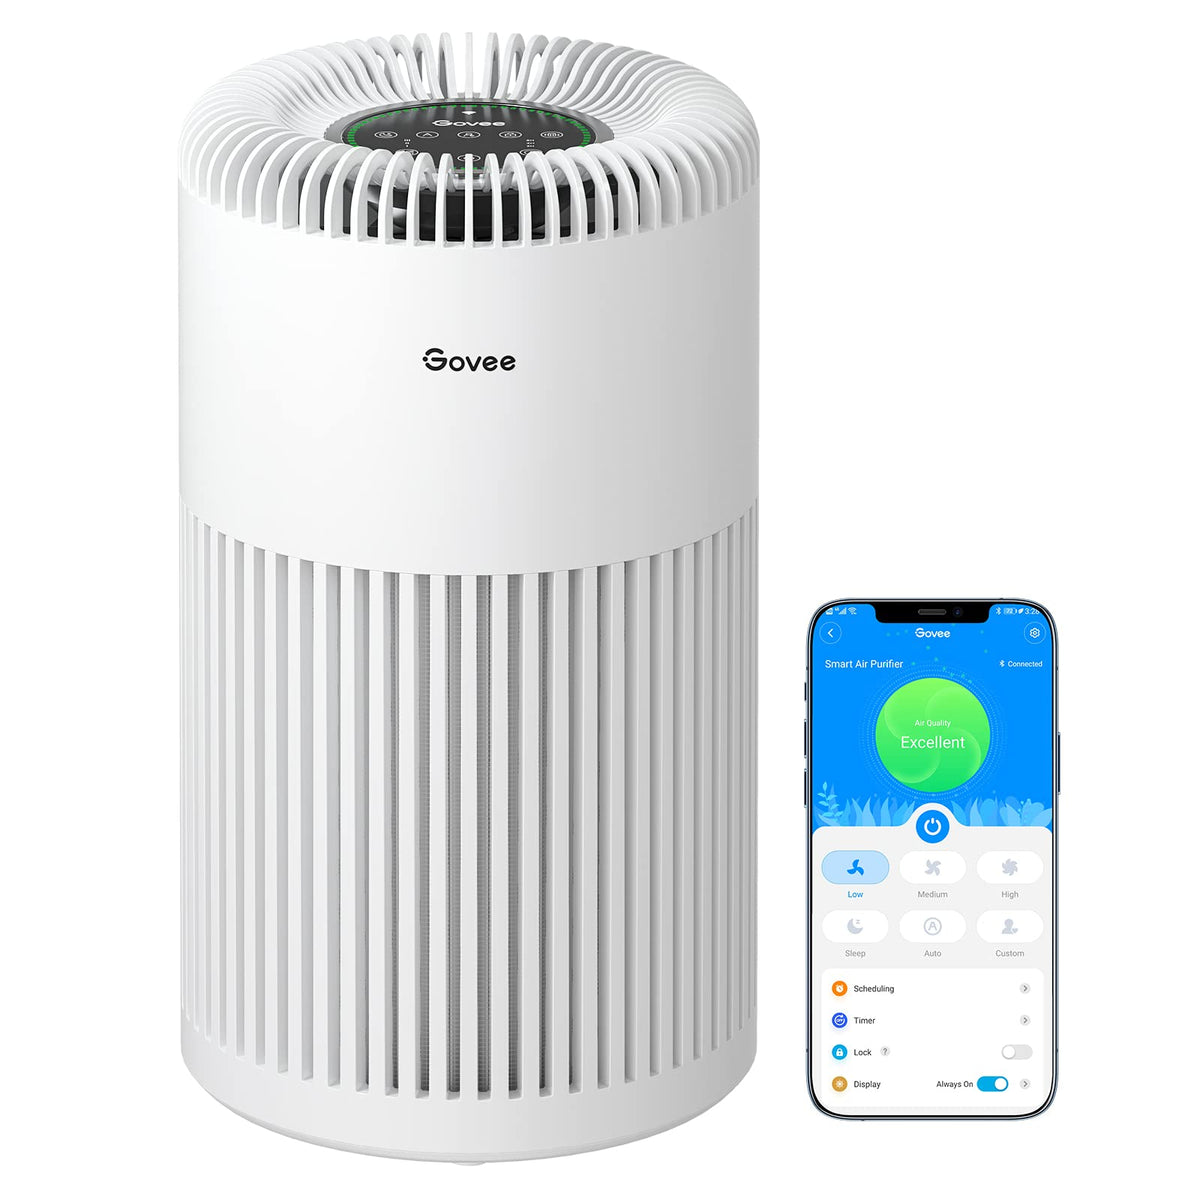 Govee Smart Air Quality Monitor Review